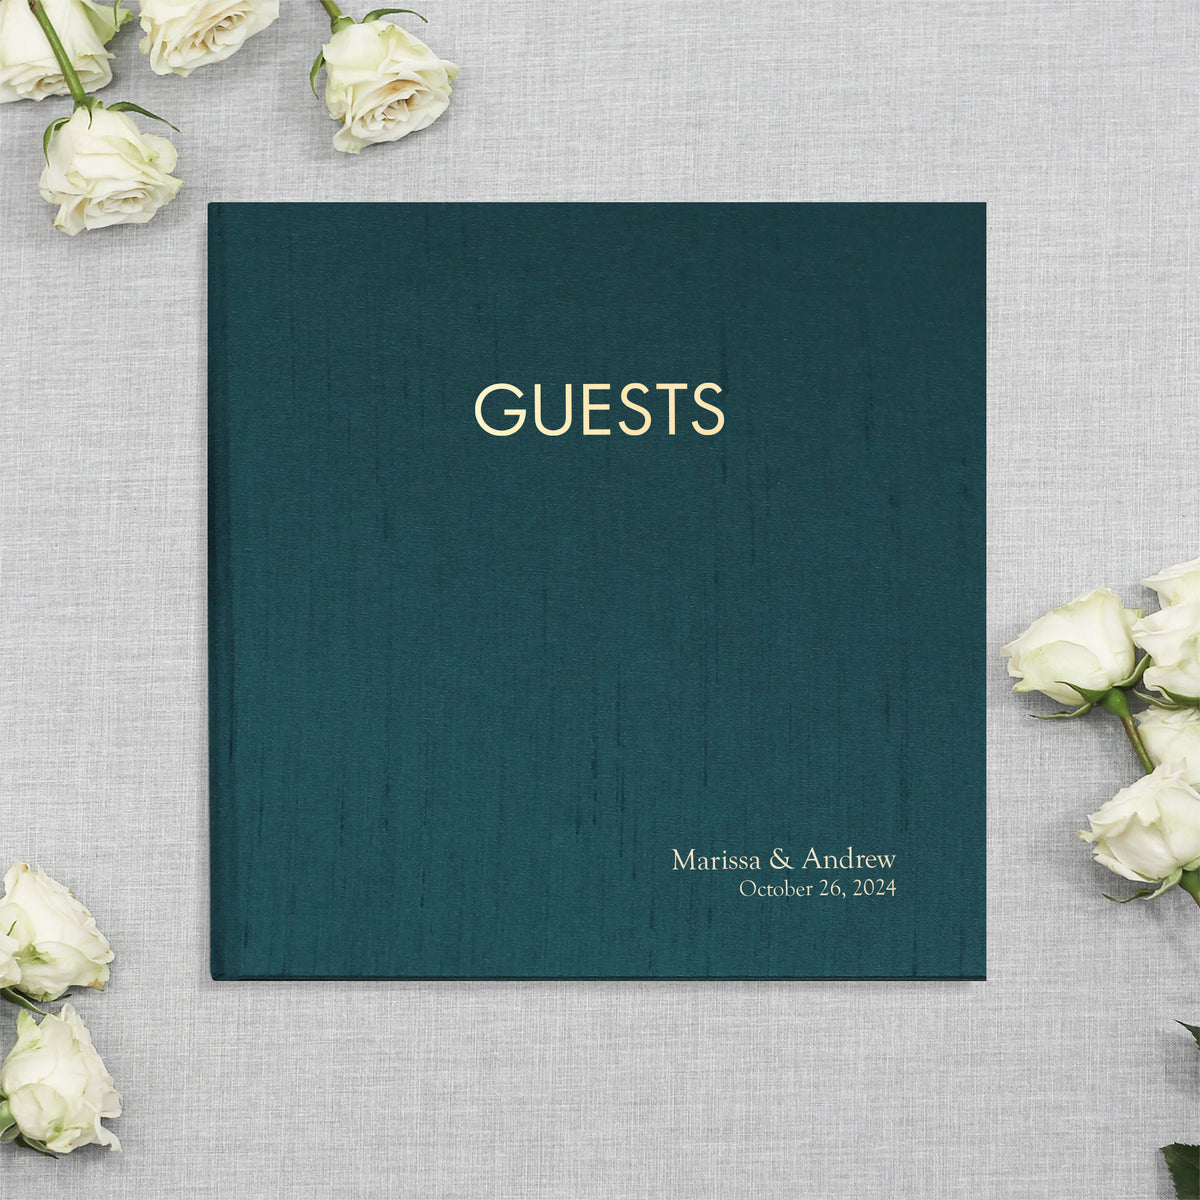 Event Guestbook | Cover: Teal Blue Silk | Available Personalized